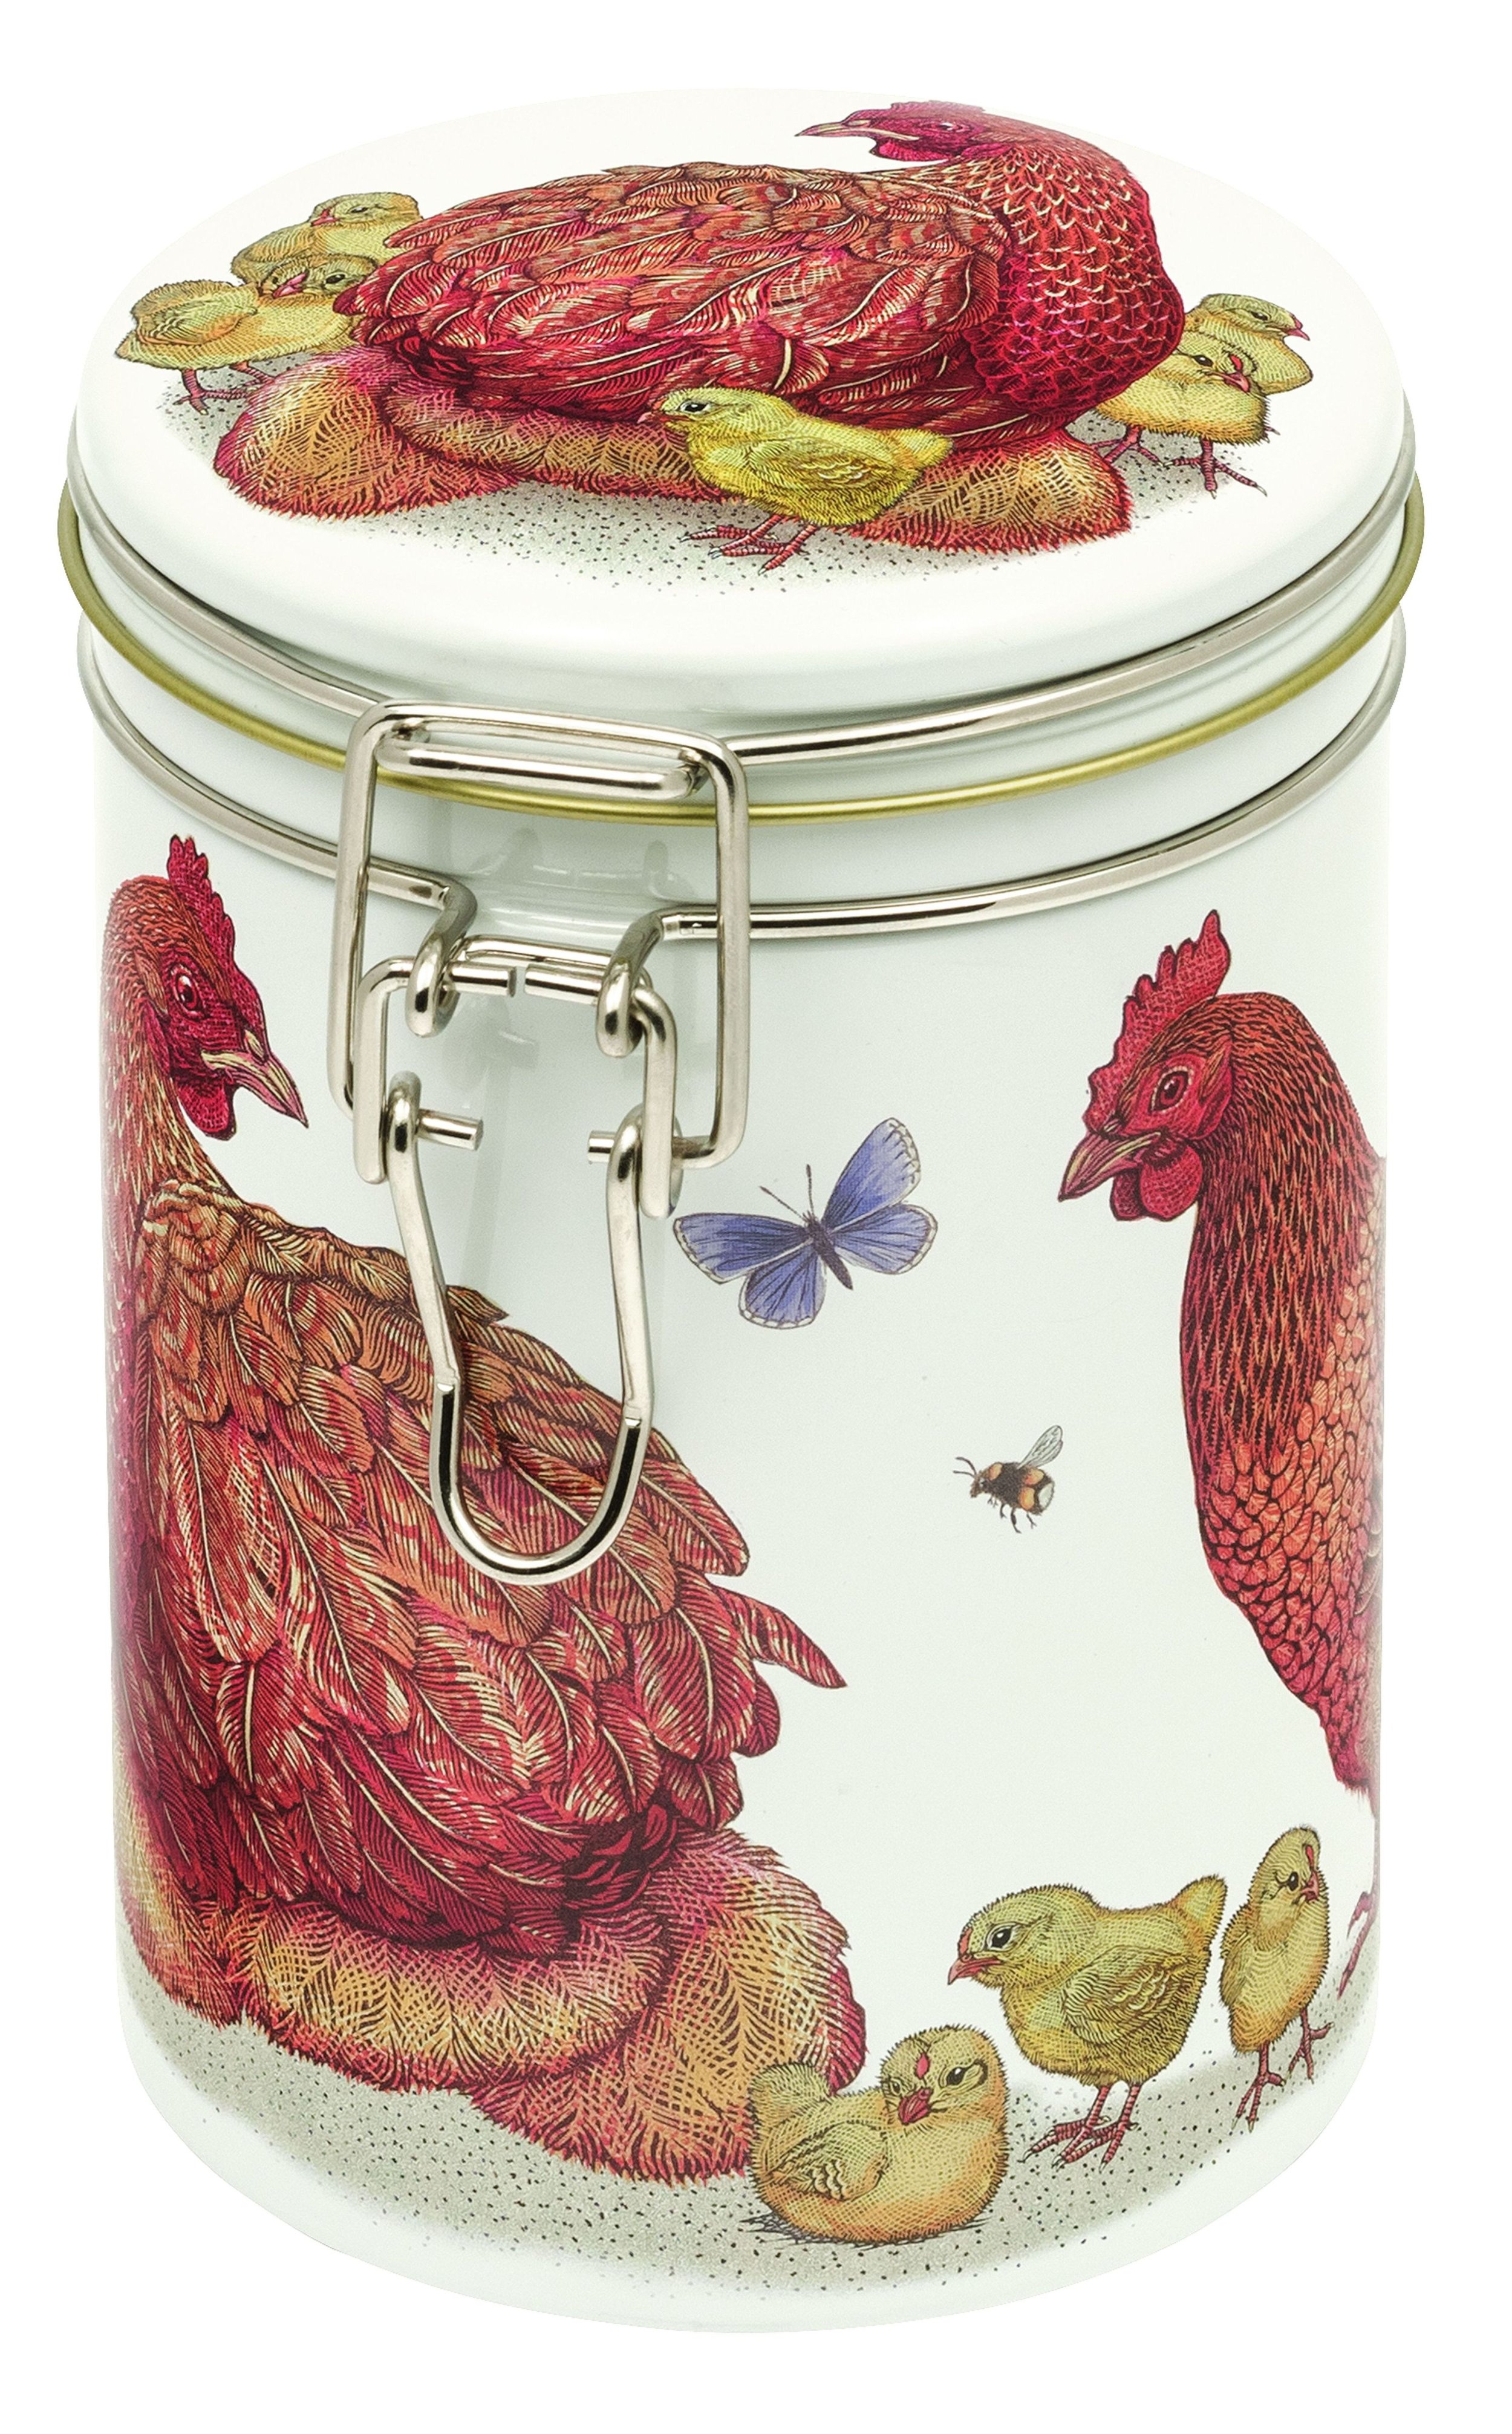 17 ANNABEL JAMES Chickens Set of 3 Cake Tins €46.13; Chickens Caddy €11.49, 